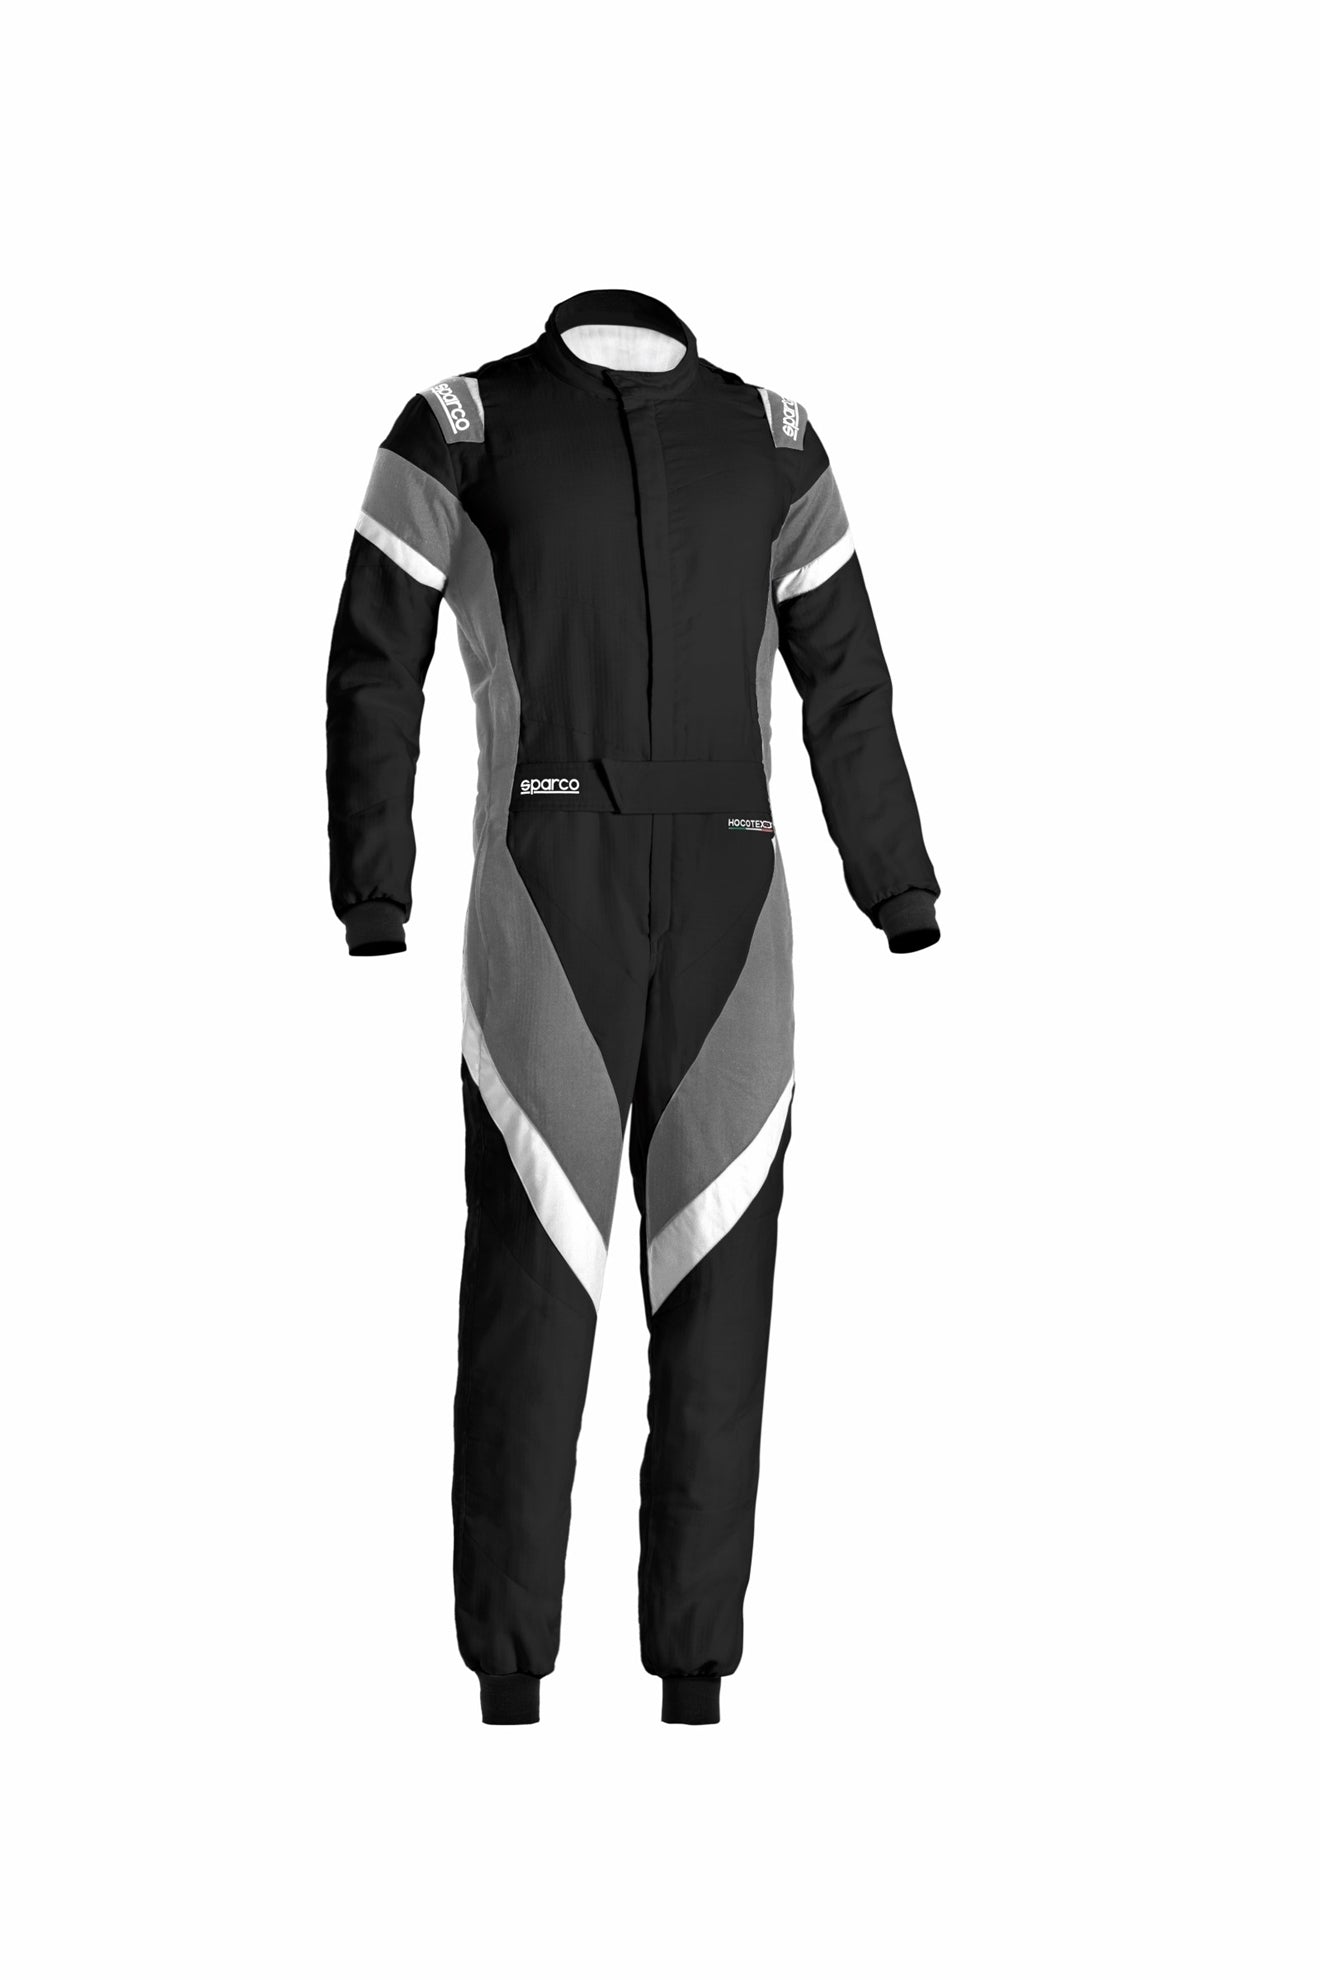 Sparco Victory (2020) Racing Suit